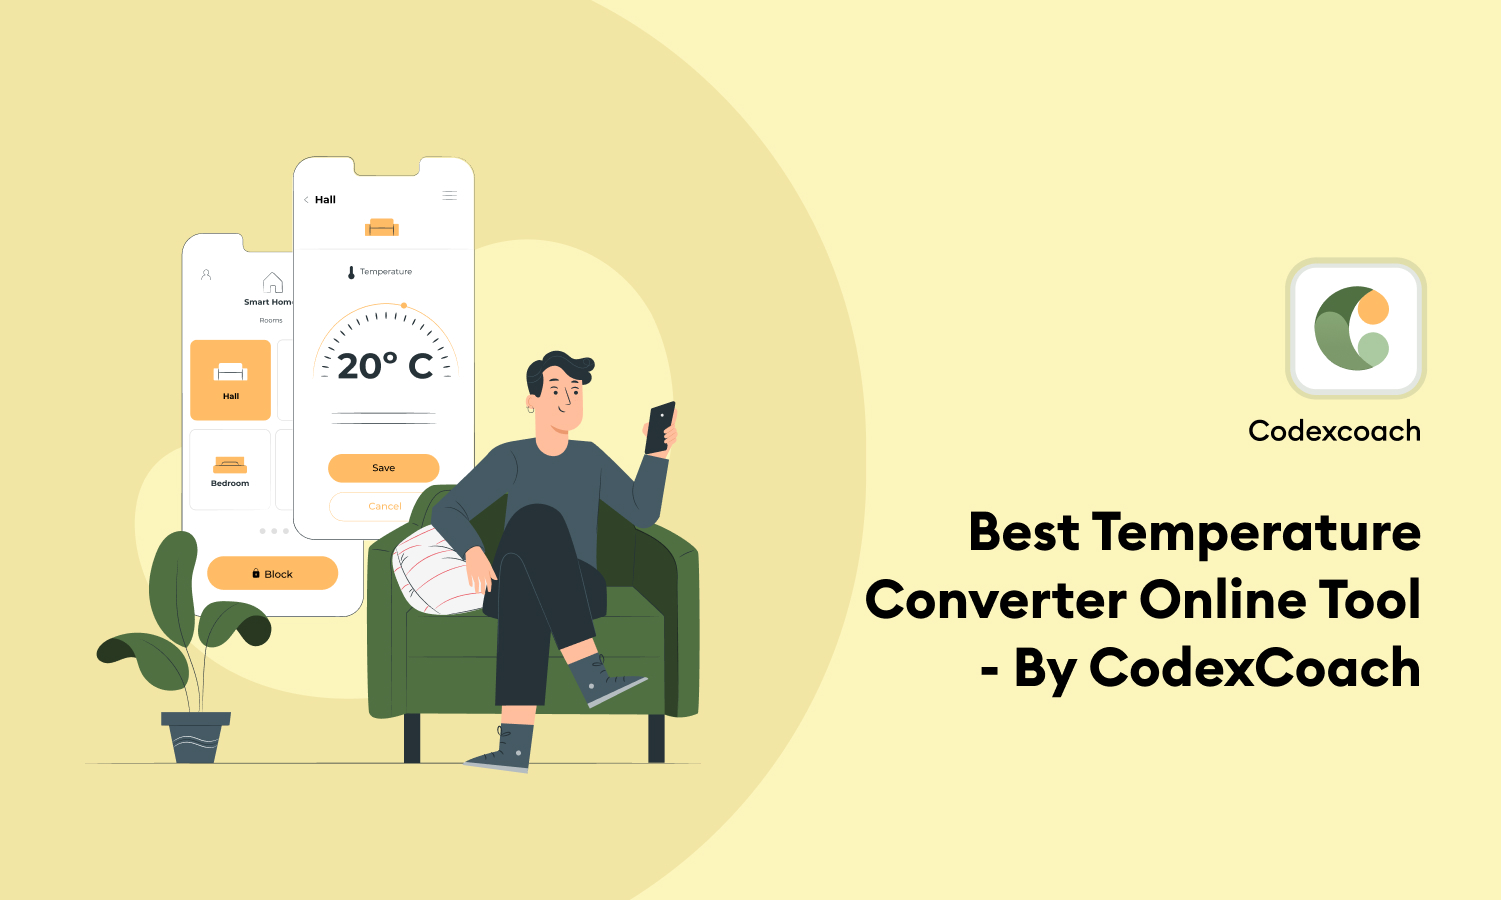 Best Temperature Converter Online Tool - By CodexCoach